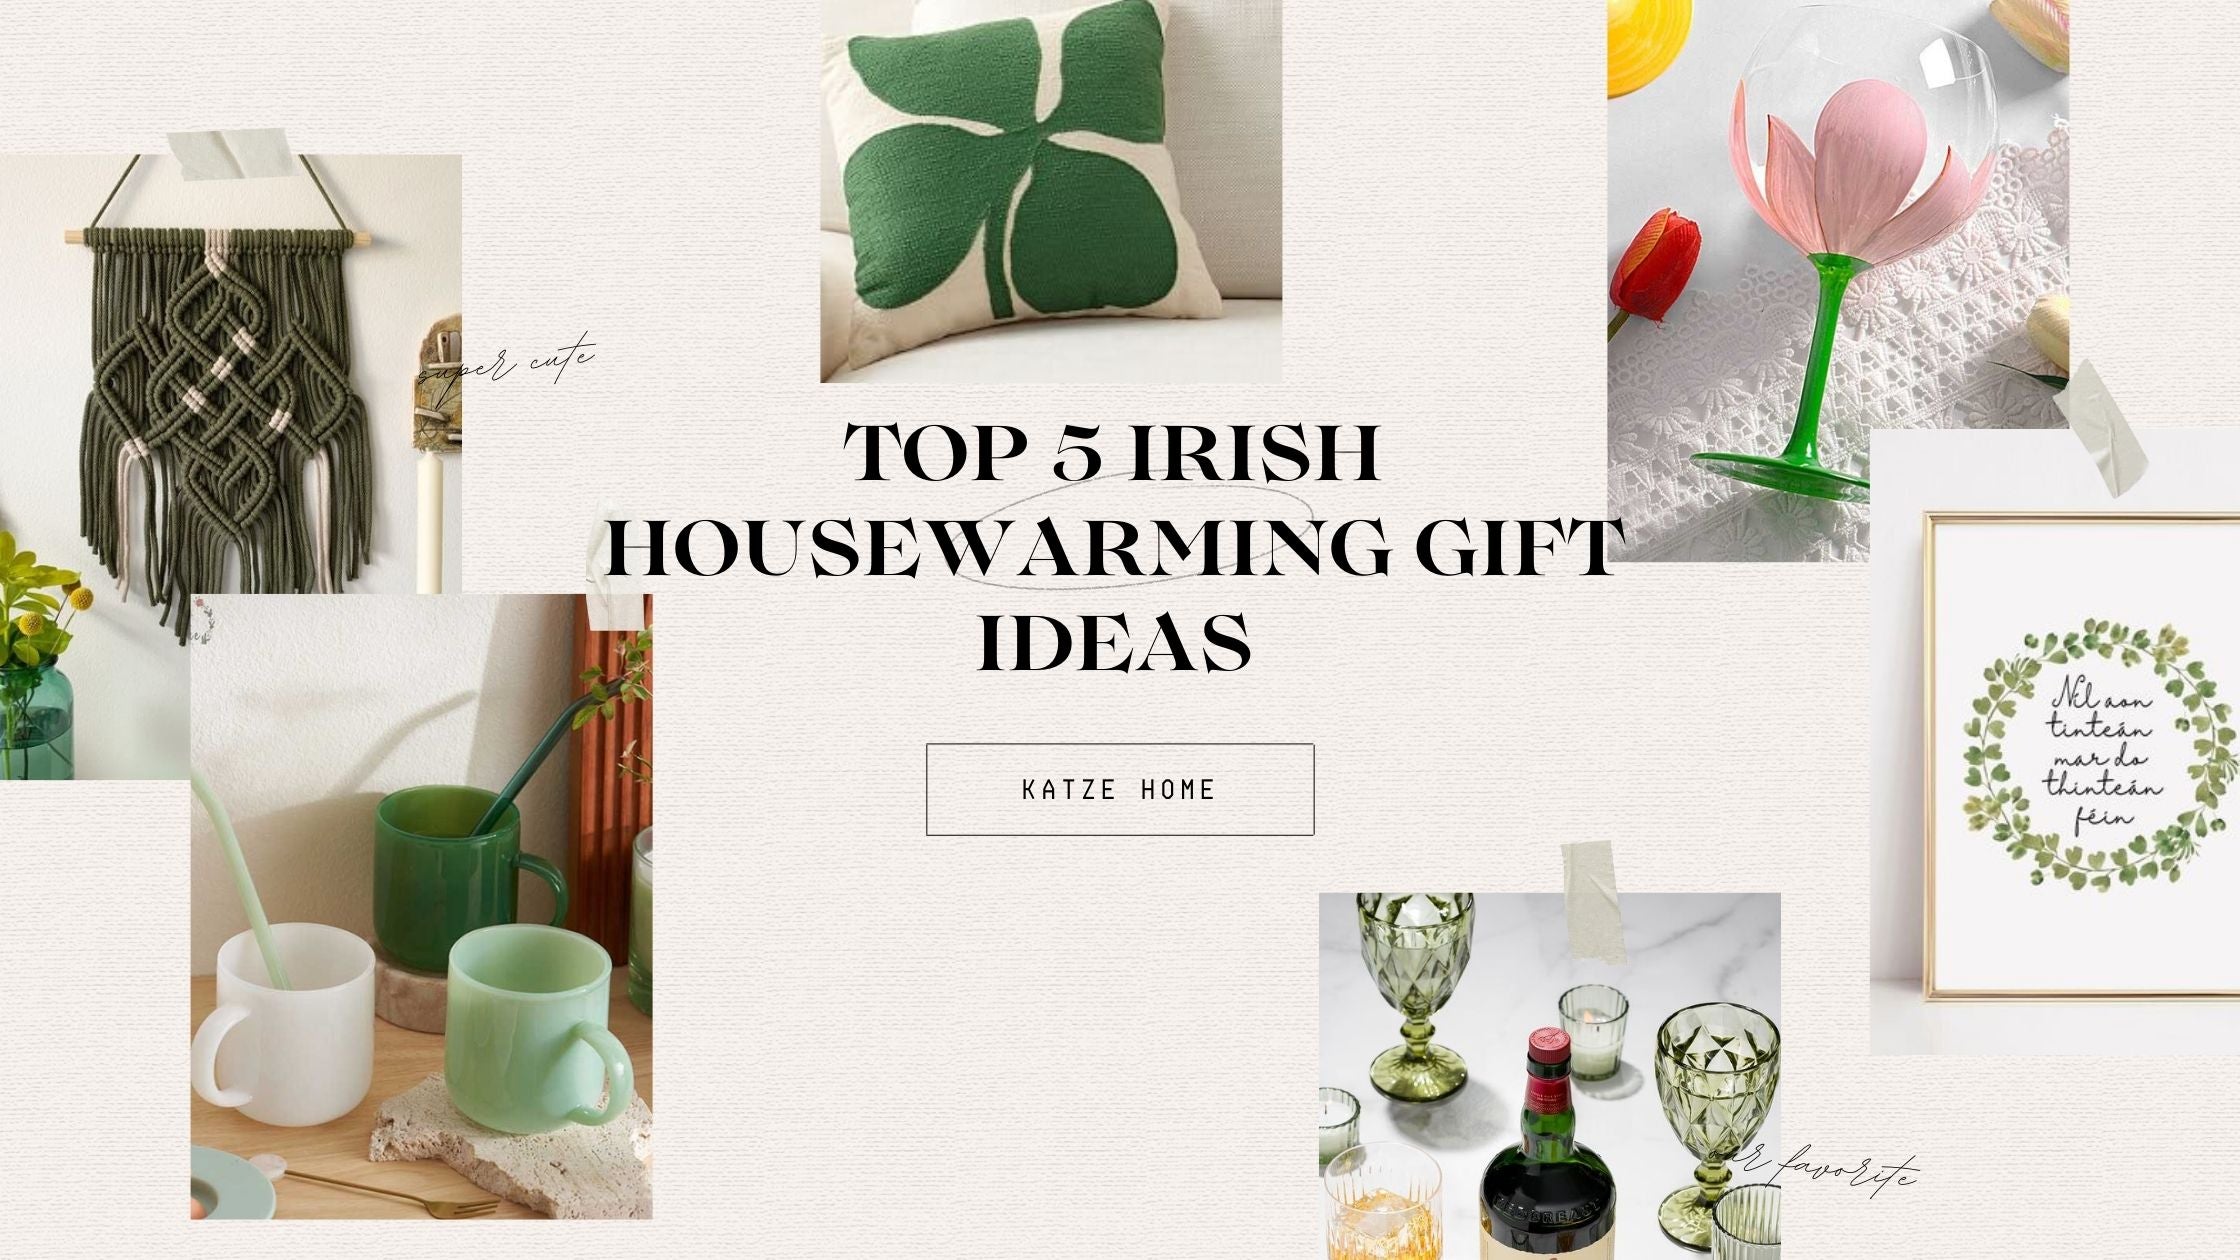 17 New Home Gift Ideas that will Awe and Delight